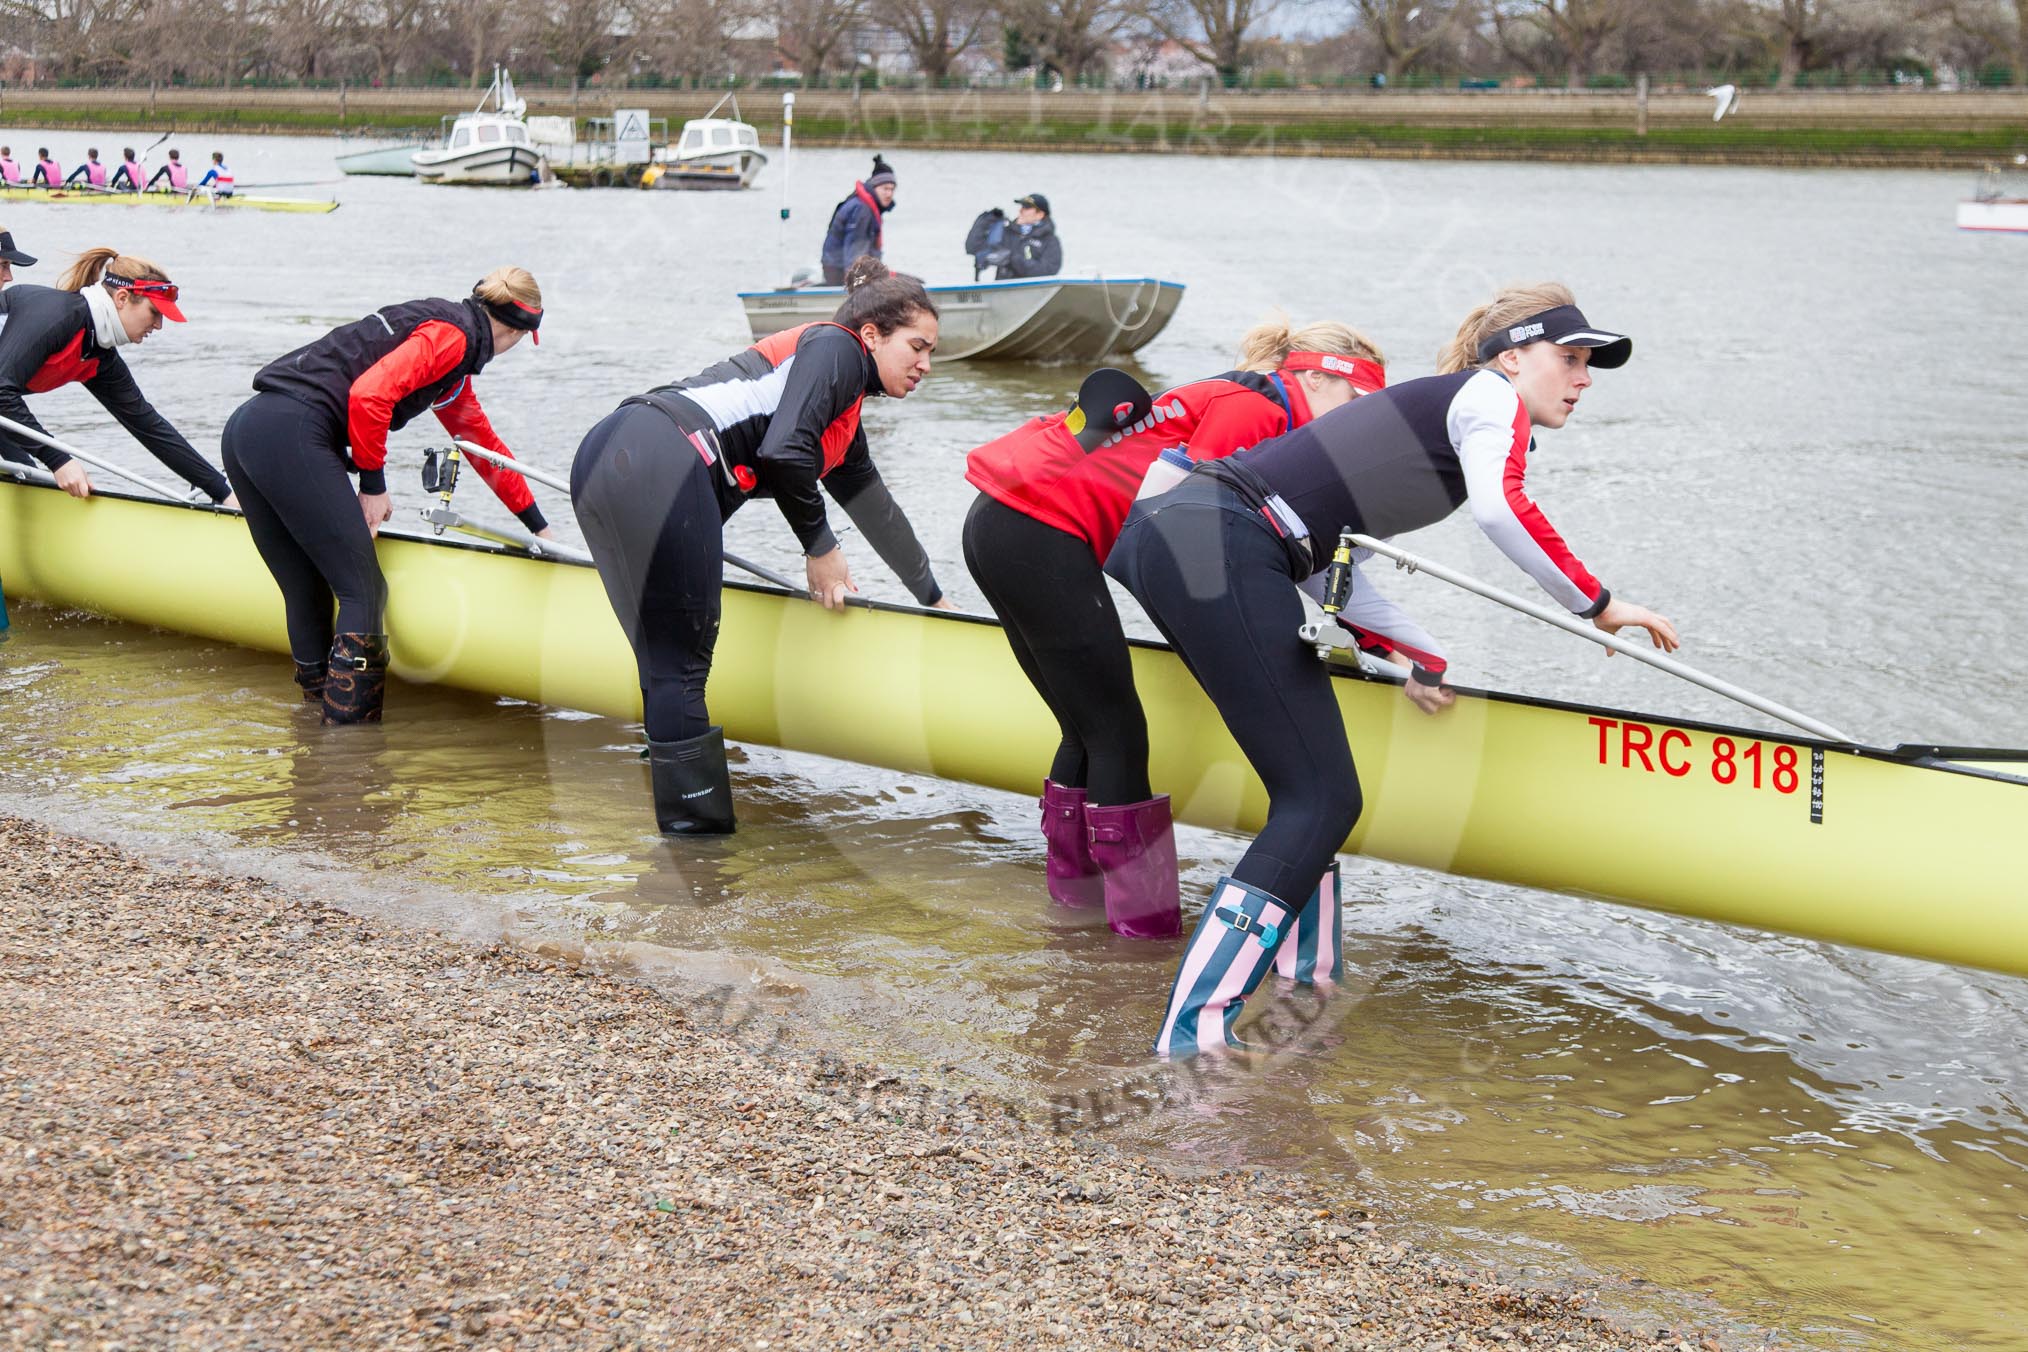 The Boat Race season 2014 - fixture CUWBC vs Thames RC.




on 02 March 2014 at 12:32, image #3